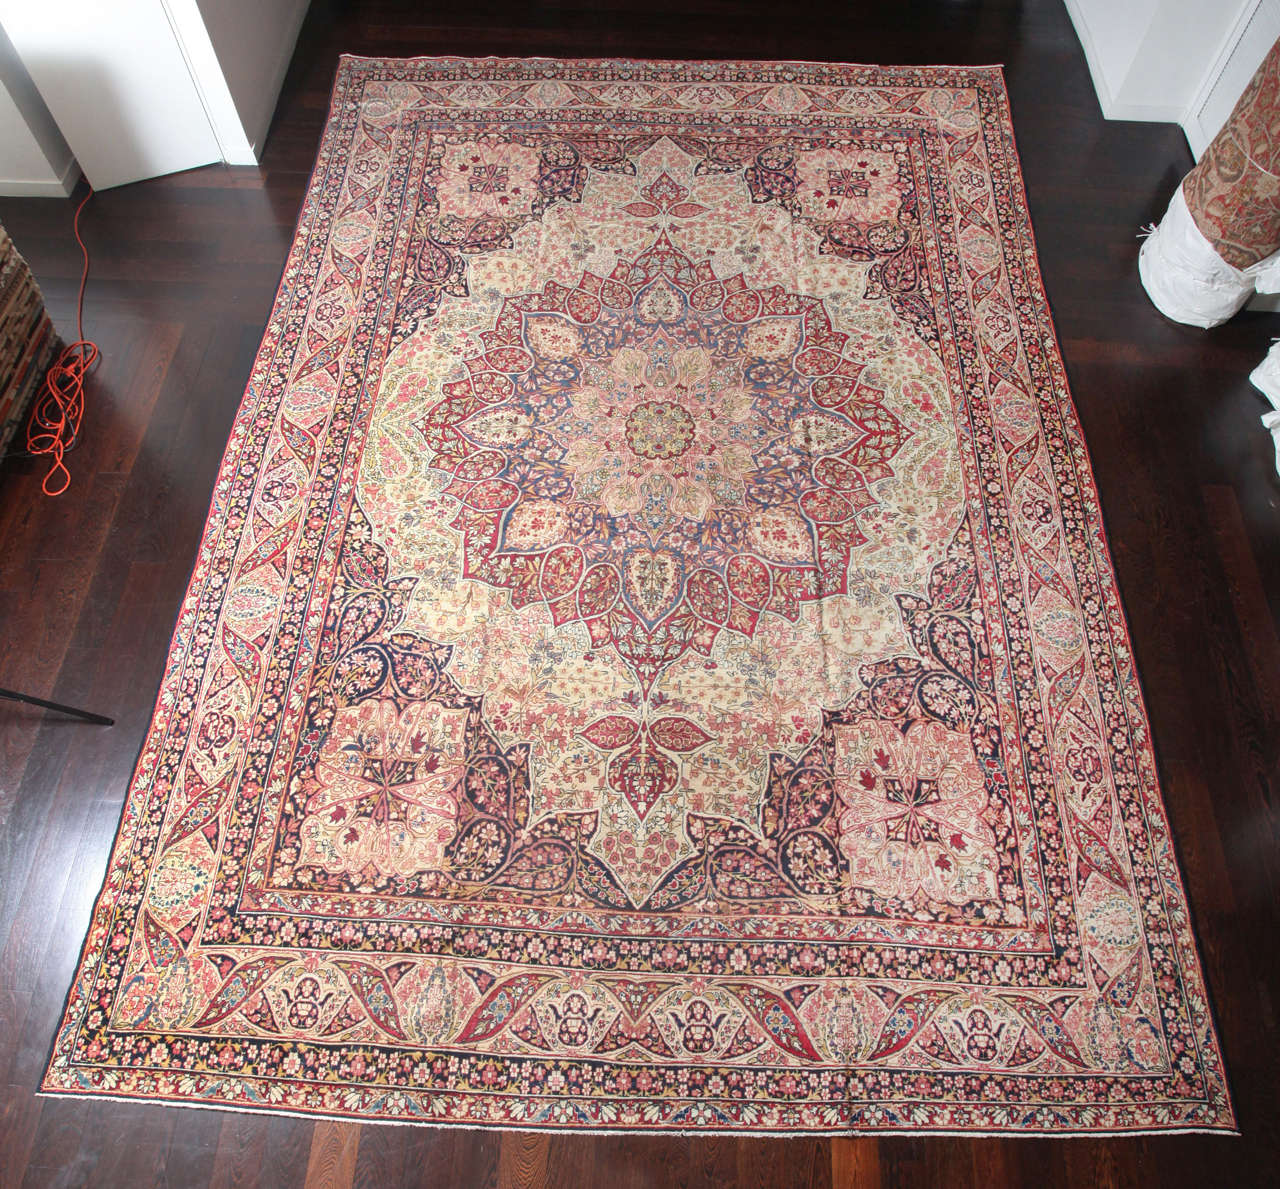 This Persian Mahan Kermanshah carpet created circa 1880 consists of a hand-knotted wool pile, cotton warp and threads, and natural vegetable dyes. Made in Mahan, Kerman province, the weavers of this carpet were followers of Sufi master Shah